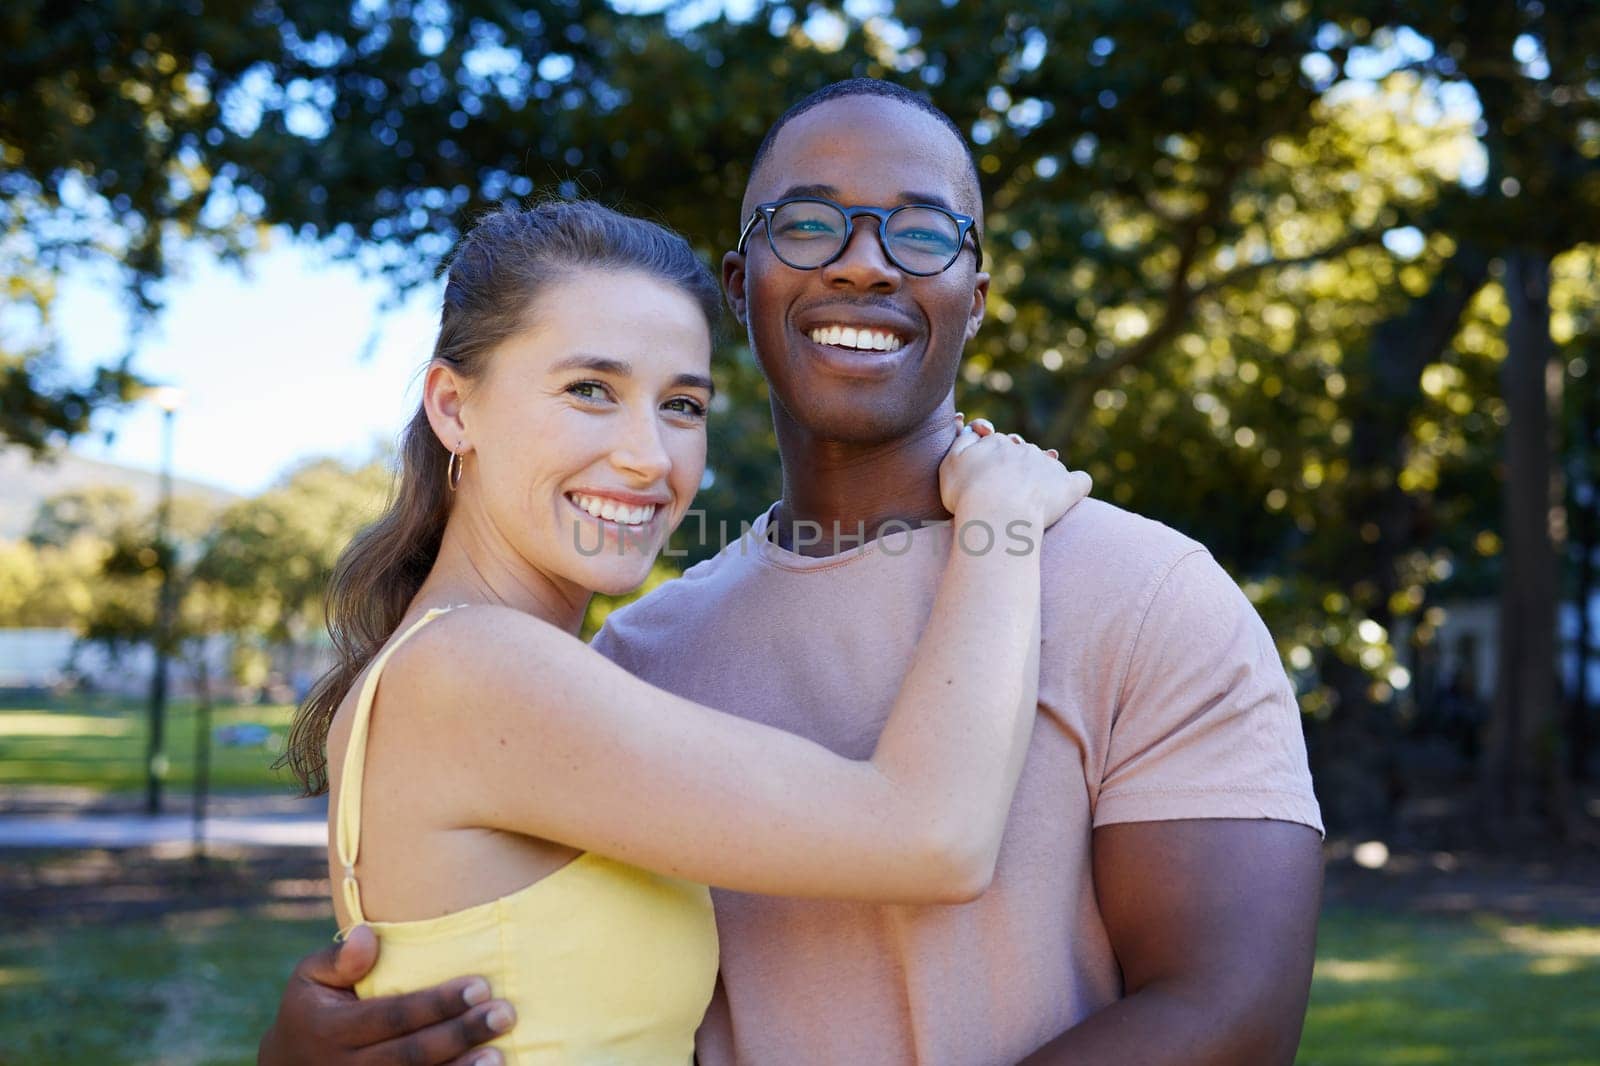 Interracial, portrait and couple hug, park or smile for relationship, romance or bonding. Love, black man or woman romantic in nature, loving or happiness with embrace, dating or quality time outdoor by YuriArcurs